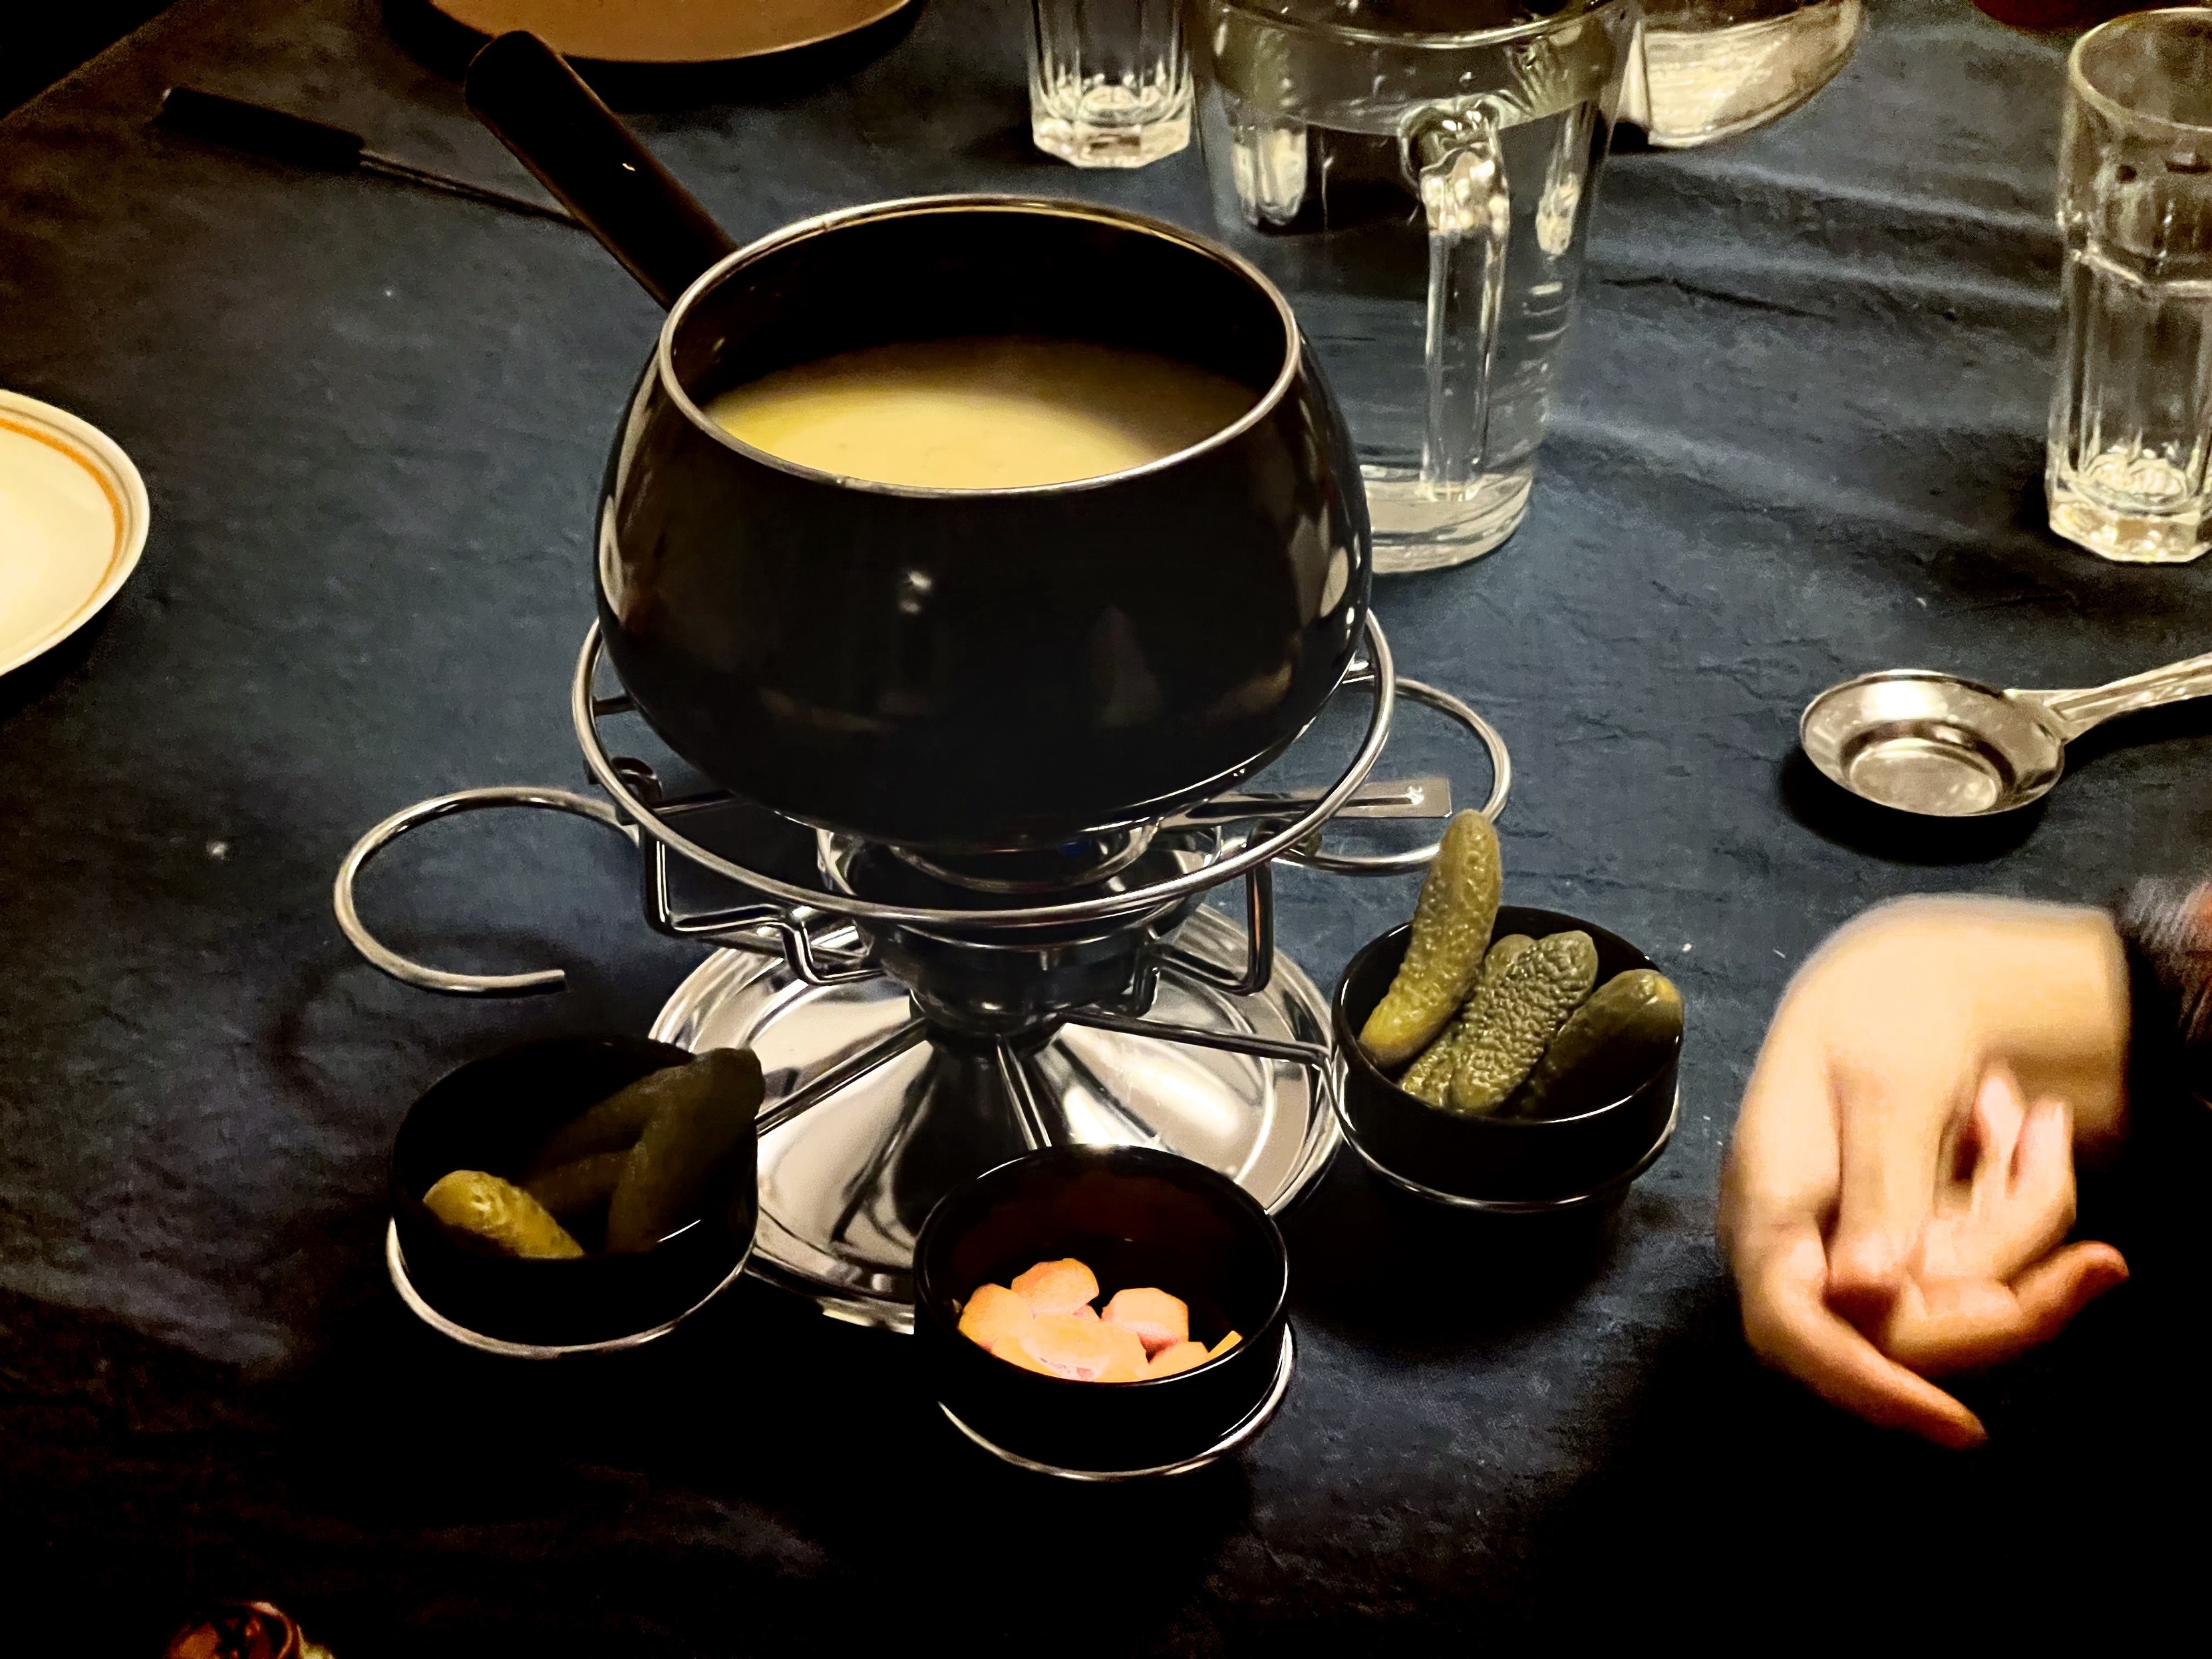 Fondue set on a dining table with a pot of melted cheese, dipping bowls with pickles and other items, and empty glasses. A person's hand is visible to the right.